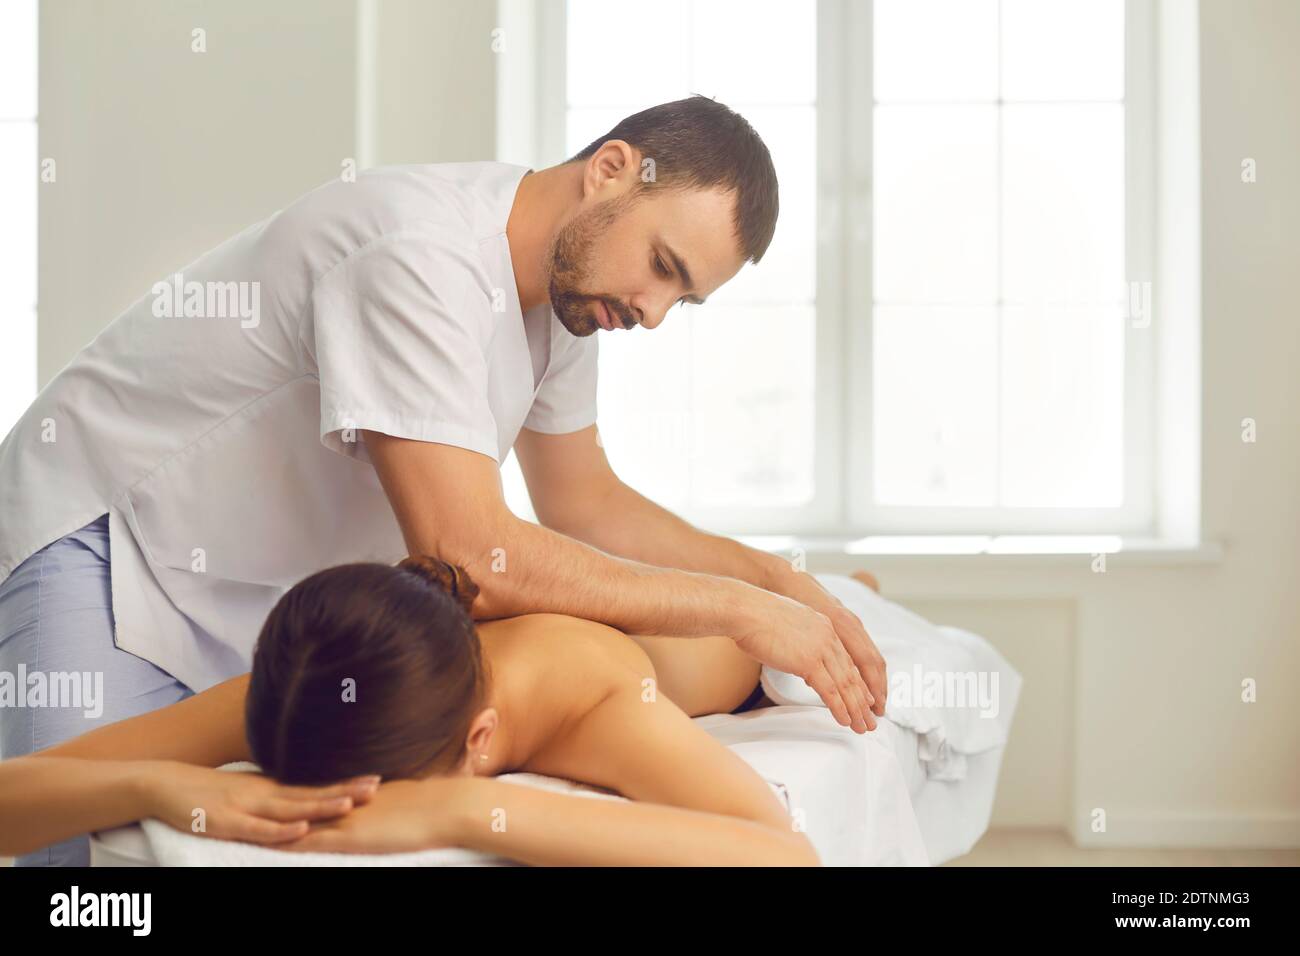 https://c8.alamy.com/comp/2DTNMG3/professional-massagist-doing-back-massage-for-young-woman-lying-on-massage-table-2DTNMG3.jpg